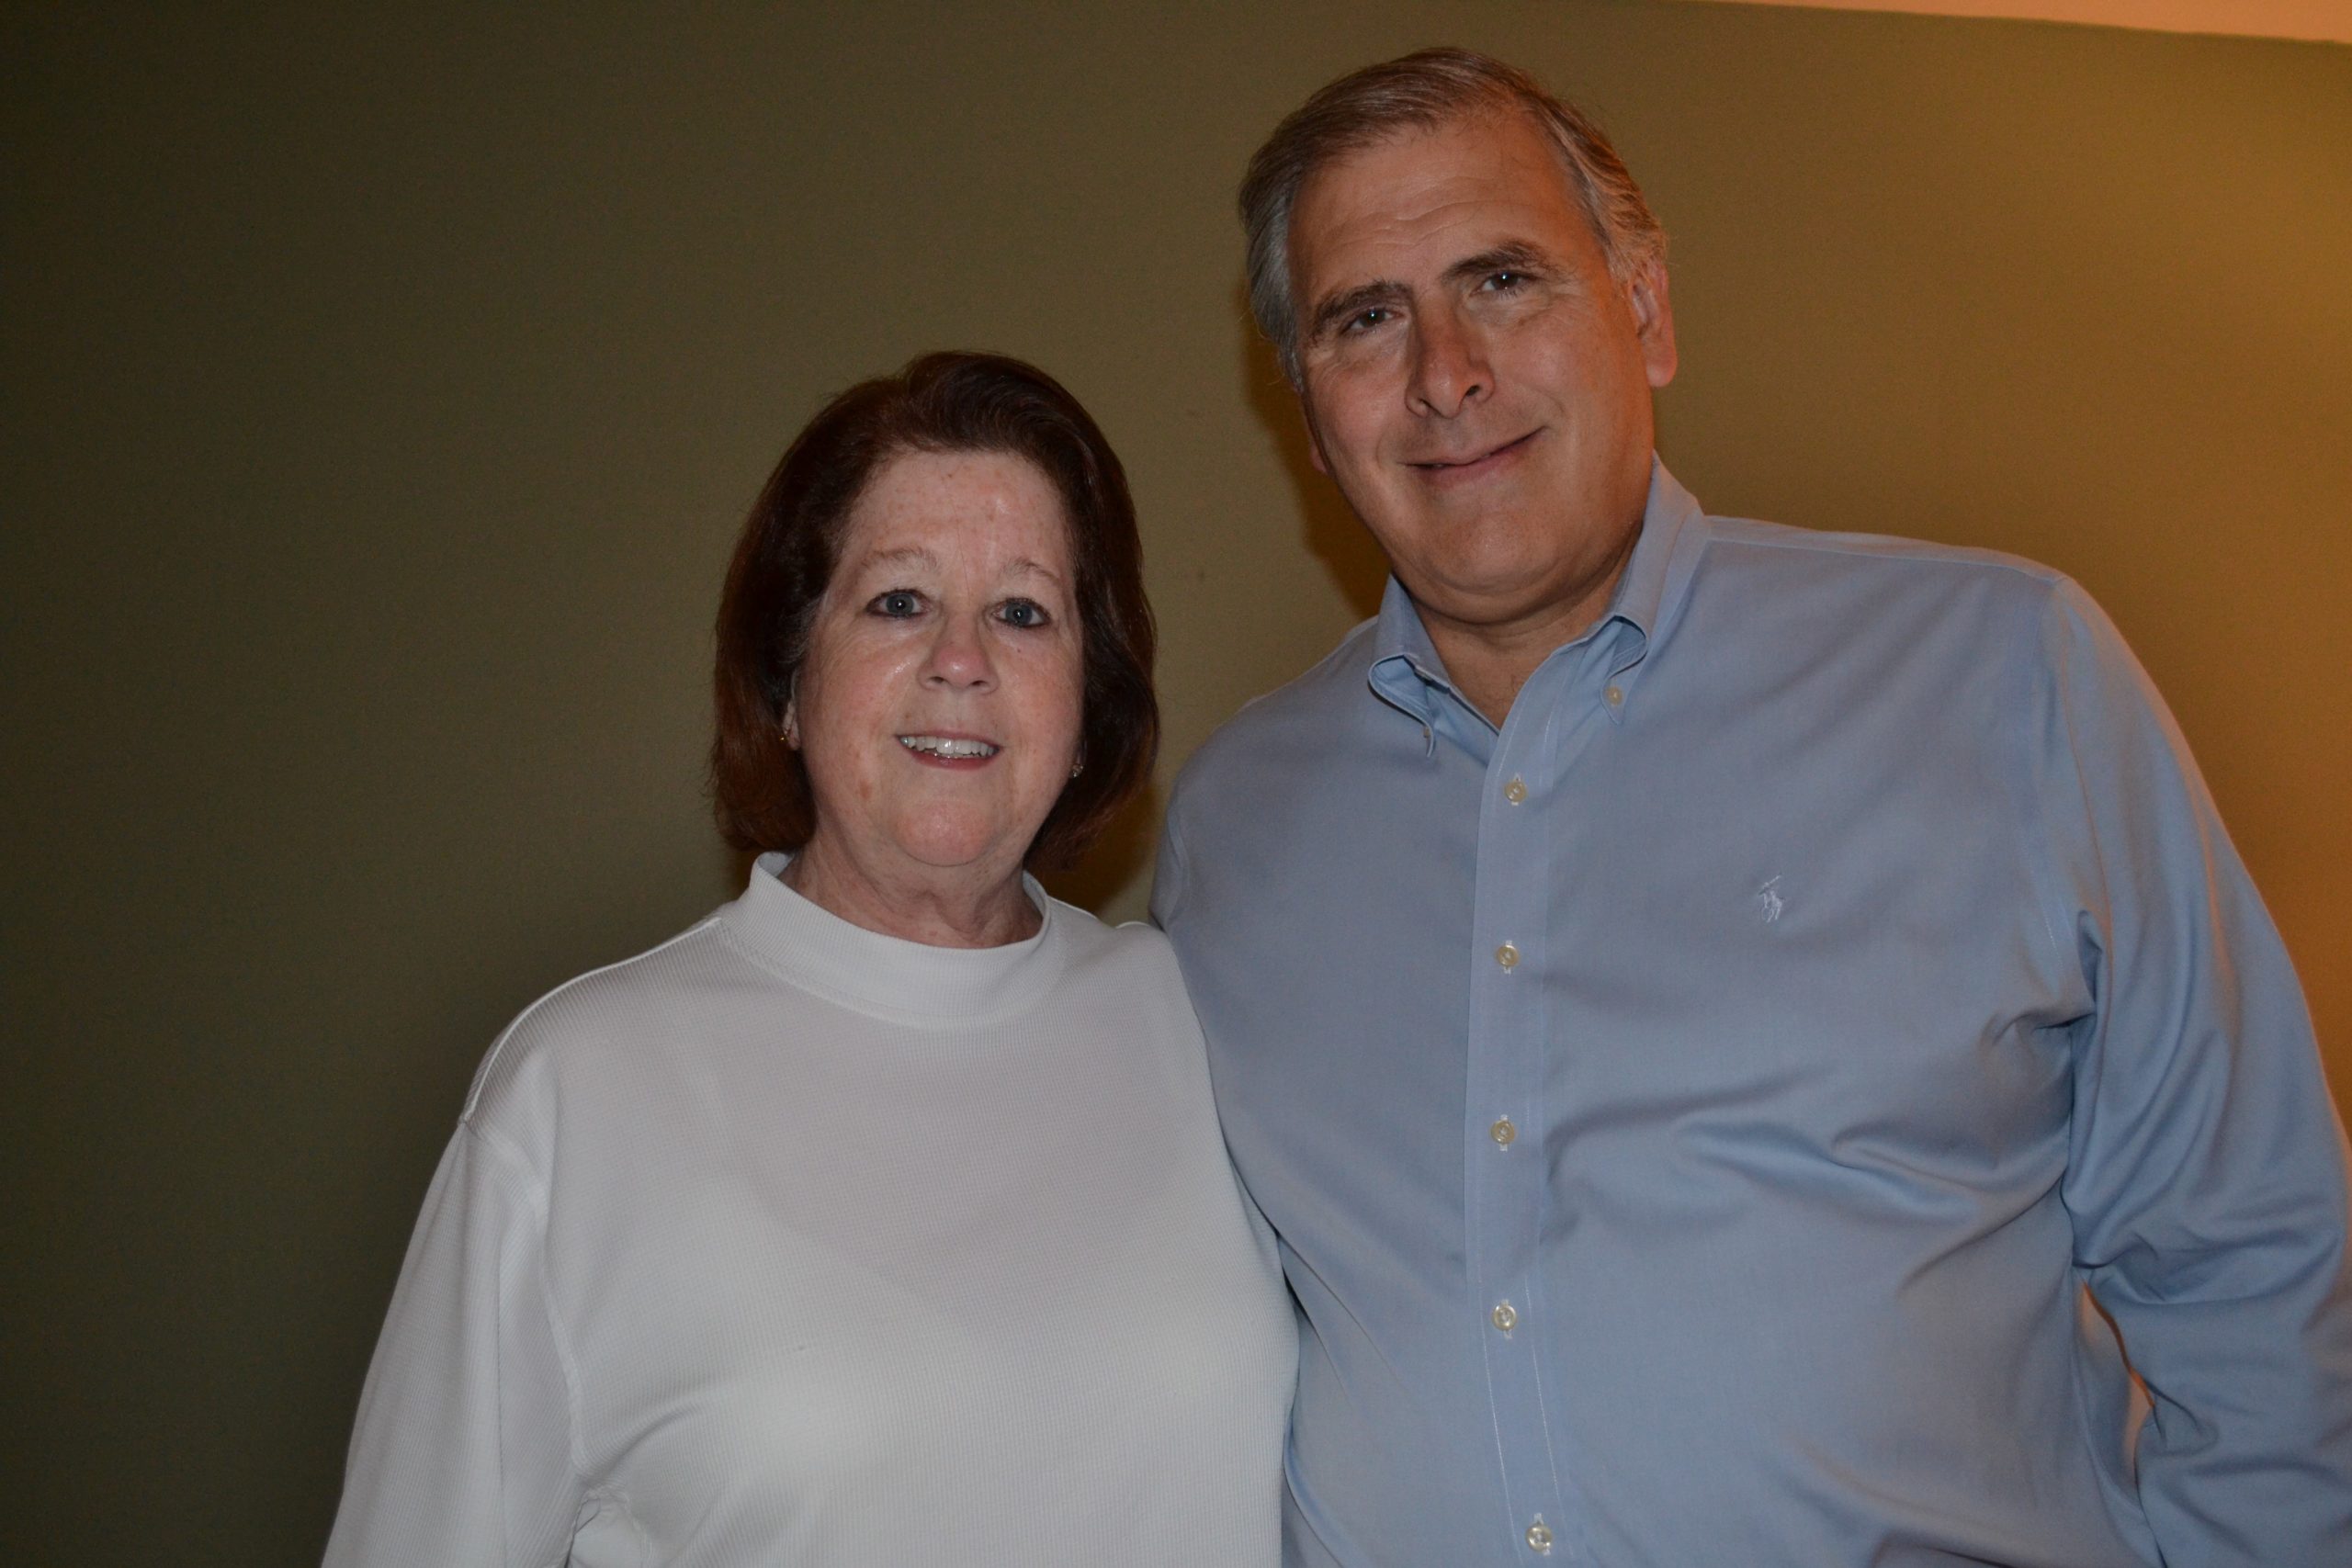 Barbara and Stuart McCormick speak of positive results after they both had hip replacement surgery at UnaSource Surgery Center in Troy, Michigan.